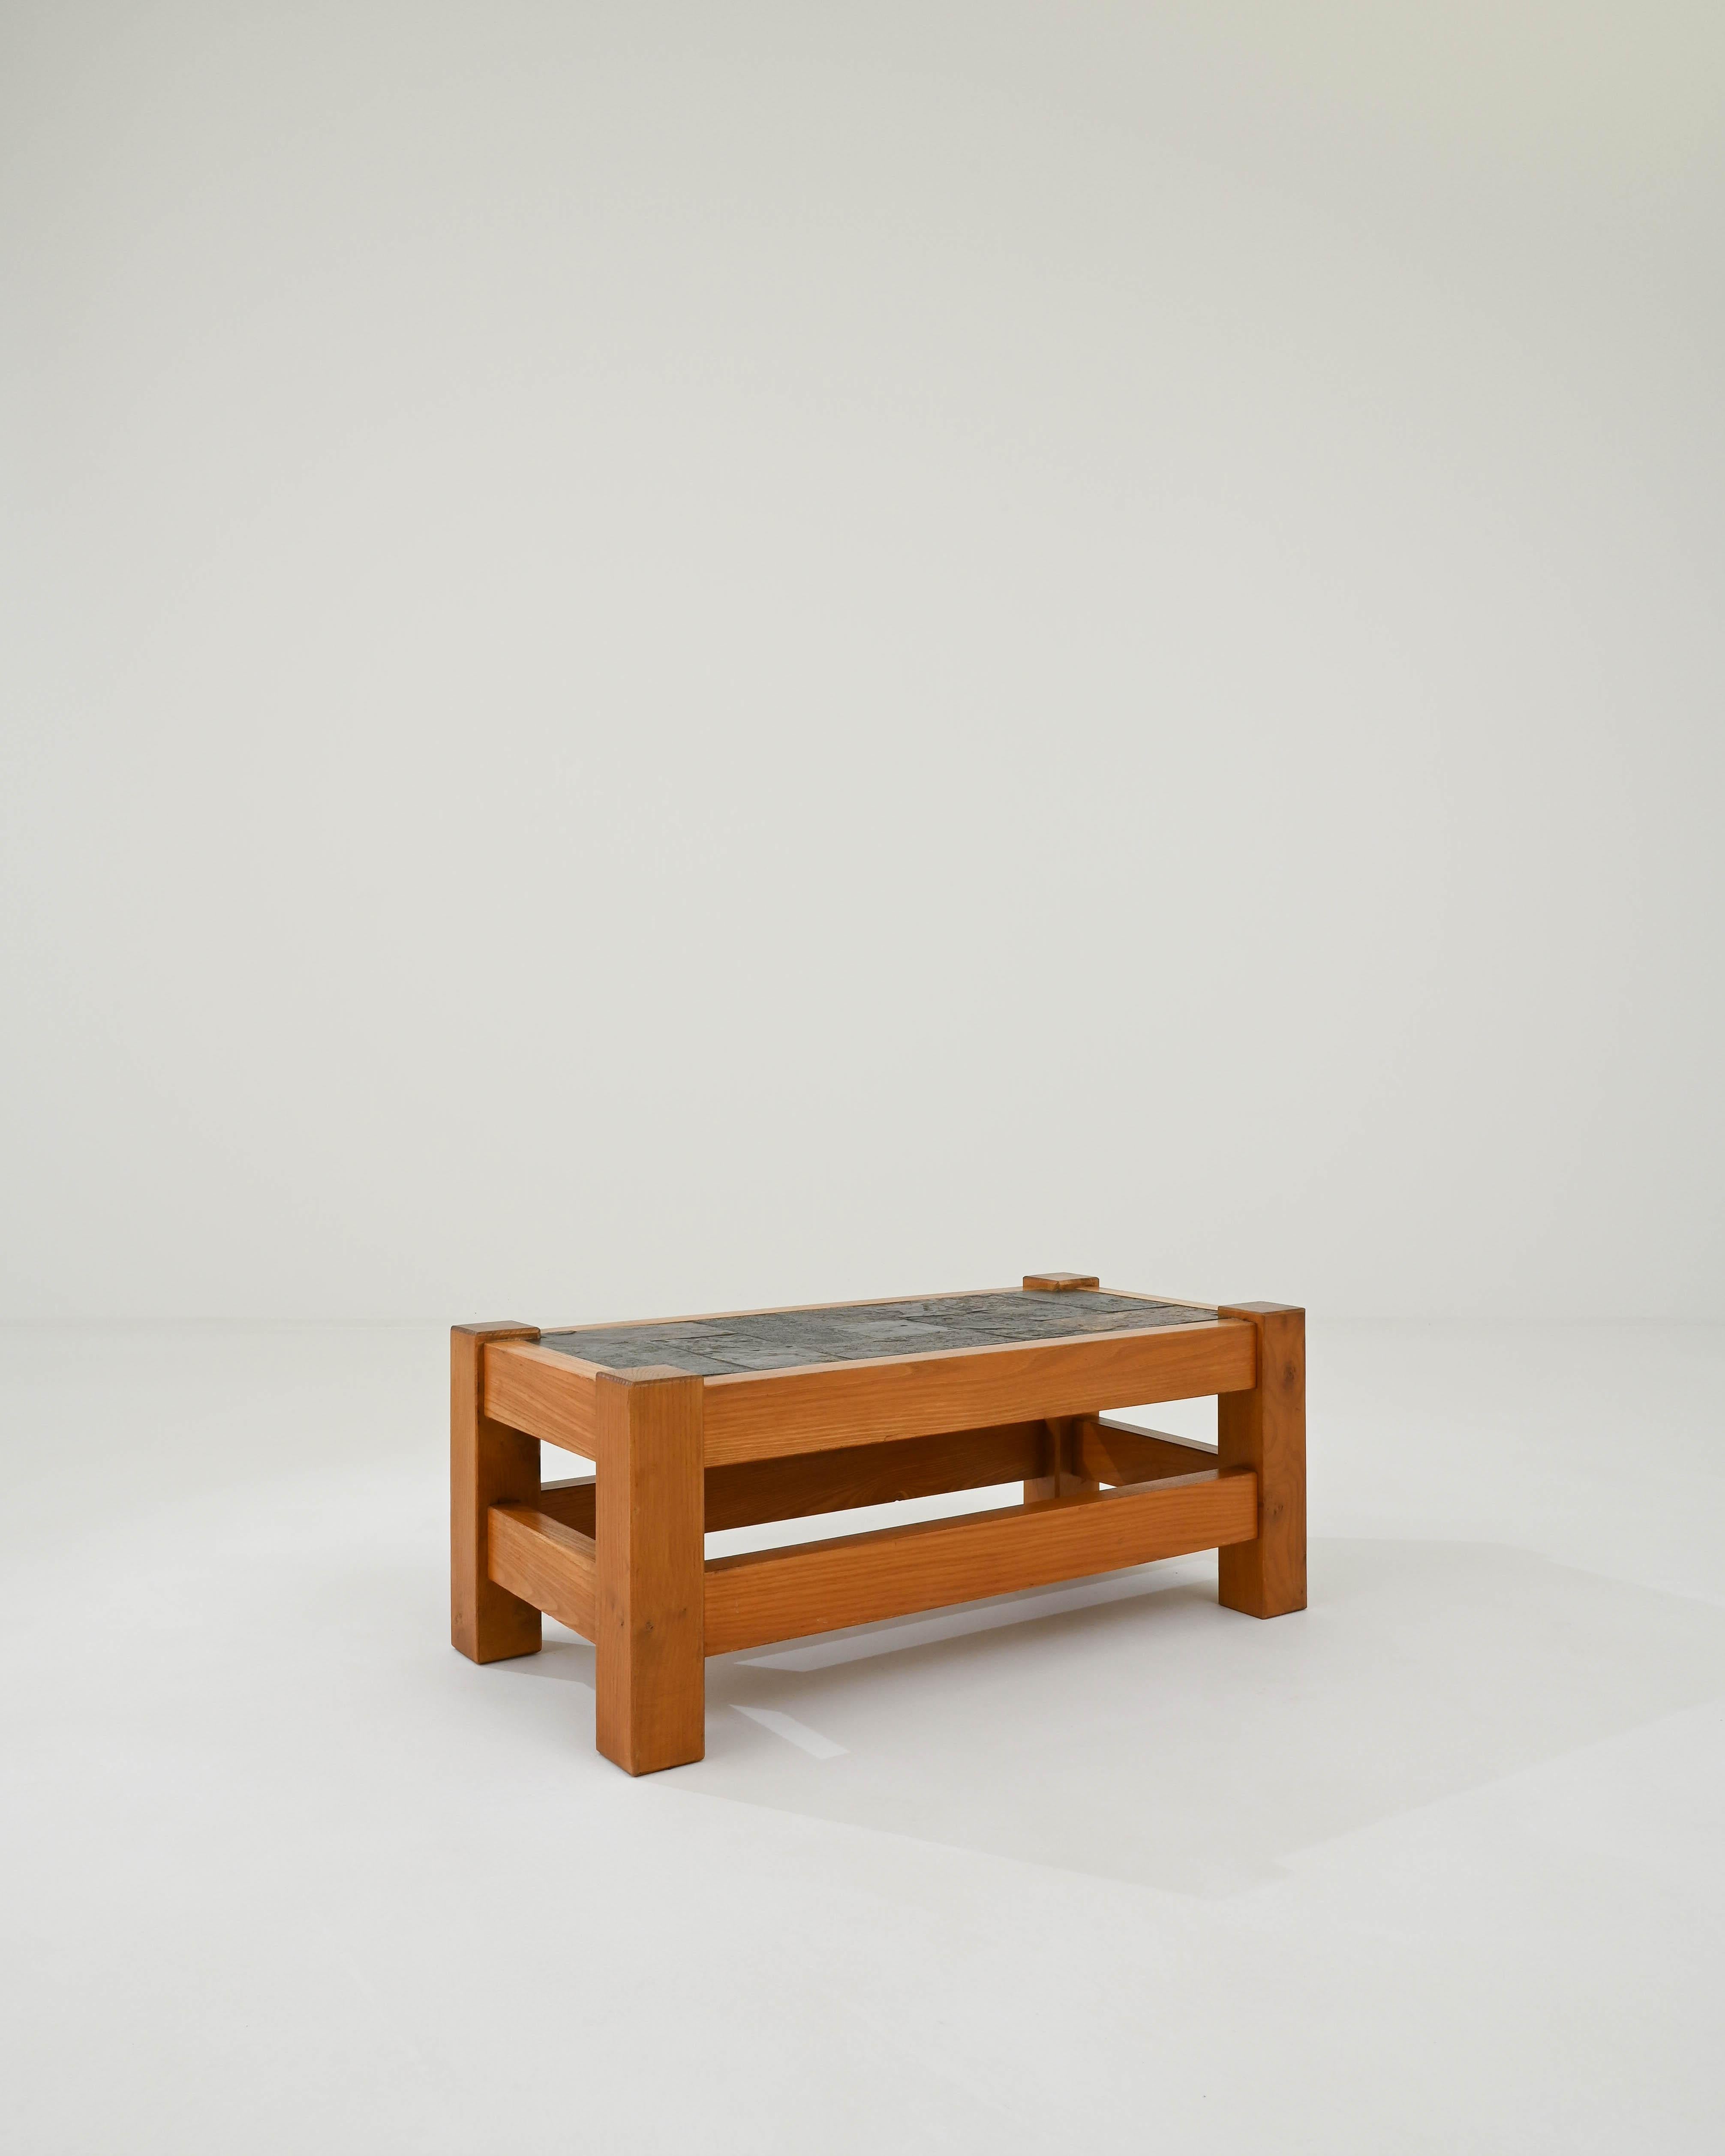 An oak coffee table with a tiled stone top produced in 20th Century France. This low table is designed in a rustic vein of the mid-century modern with a simple oak silhouette, combined with a black stone top for an image of elemental simplicity. The